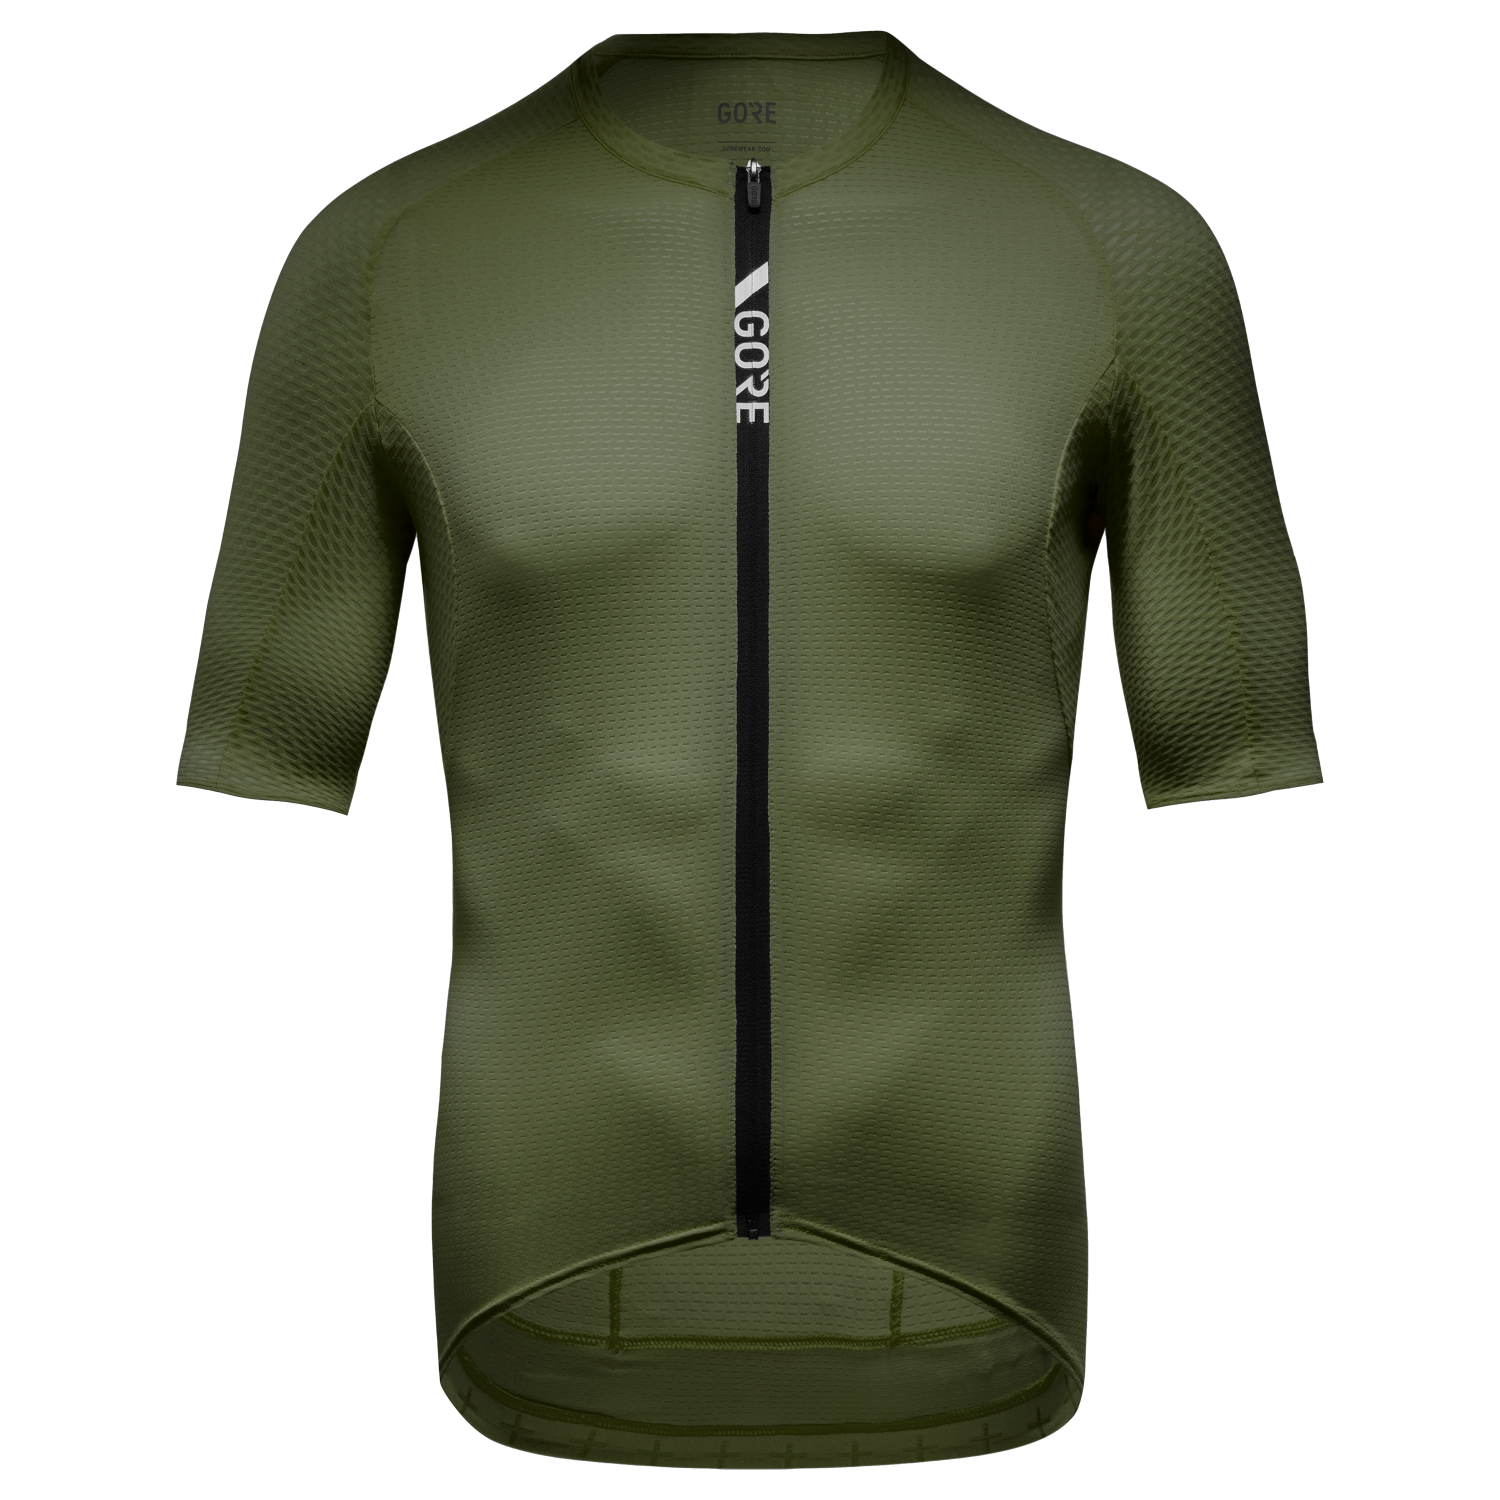 GOREWEAR Torrent Breathe Cycling Jersey Men's in Utility Green | Large | Form fit